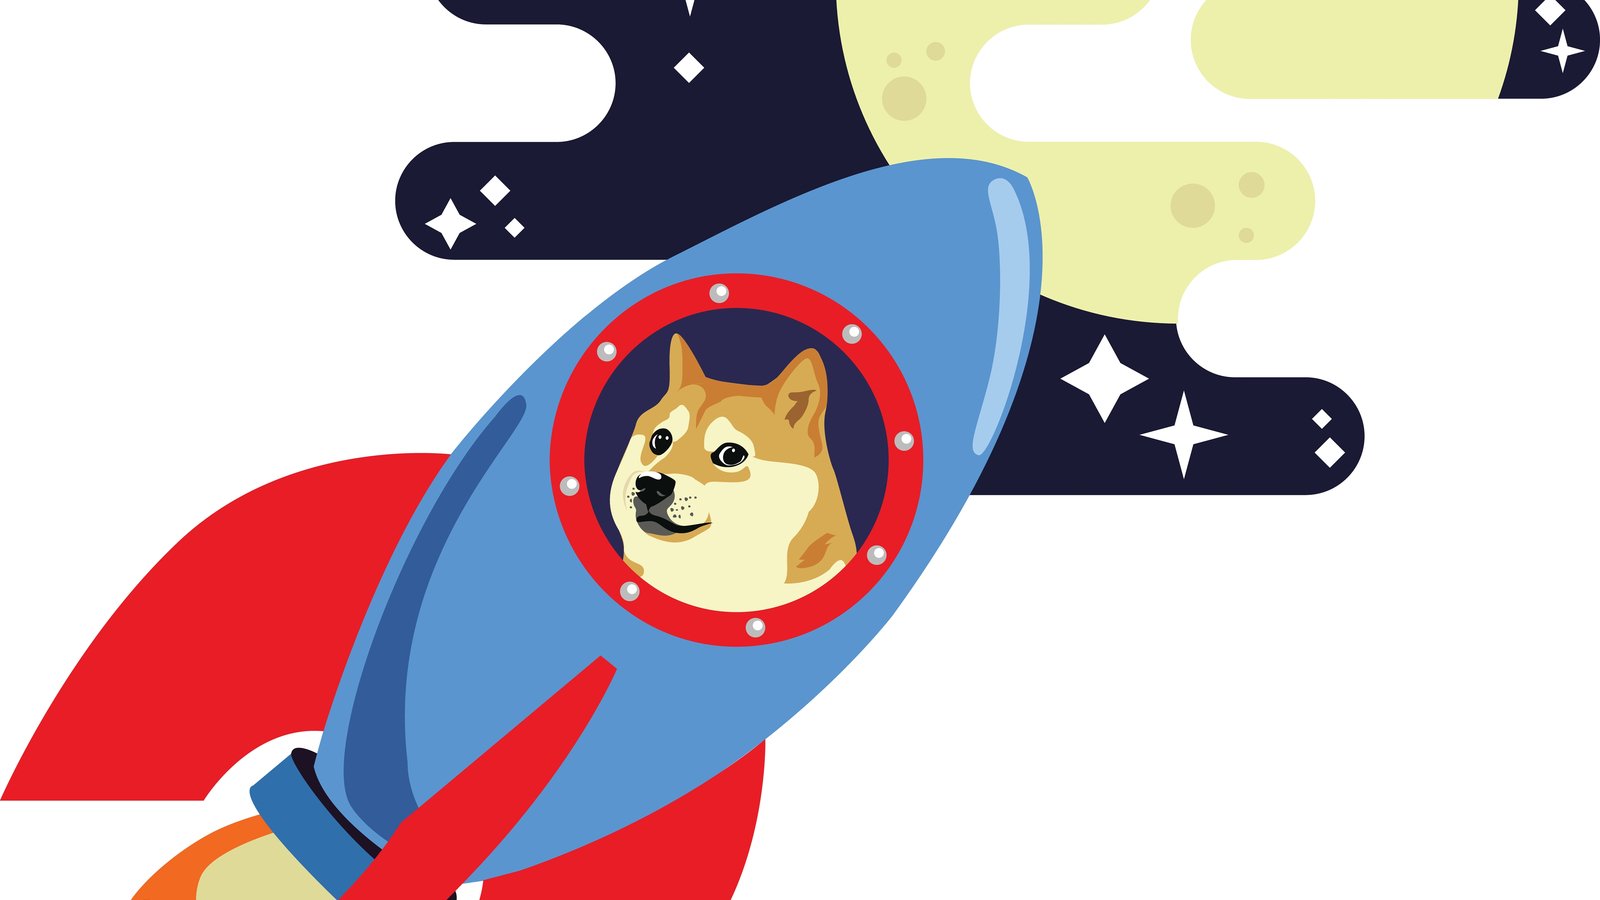 Will Dogecoin ever have a limit? What could be highest trading price of the coin